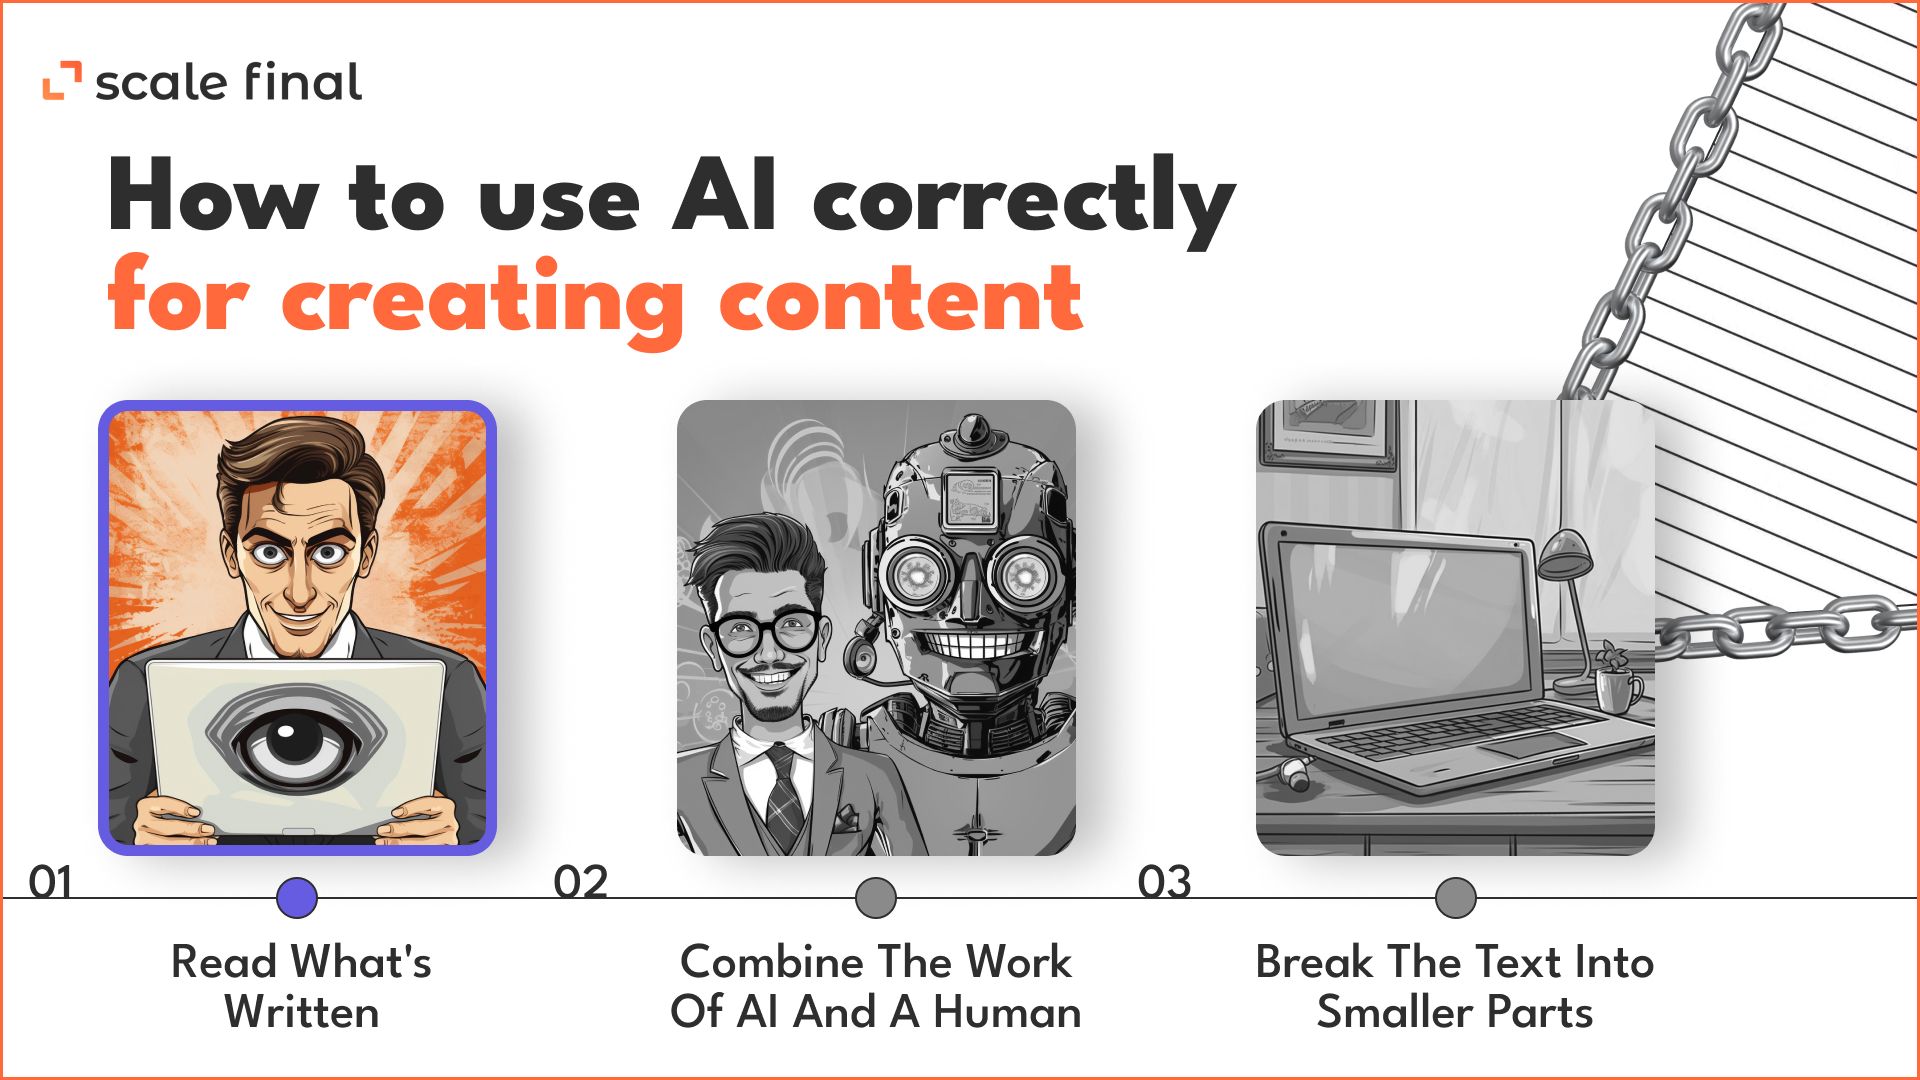 How to use AI correctly for creating content
Read what's written
Combine the work of AI and a human
Break the text into smaller parts
